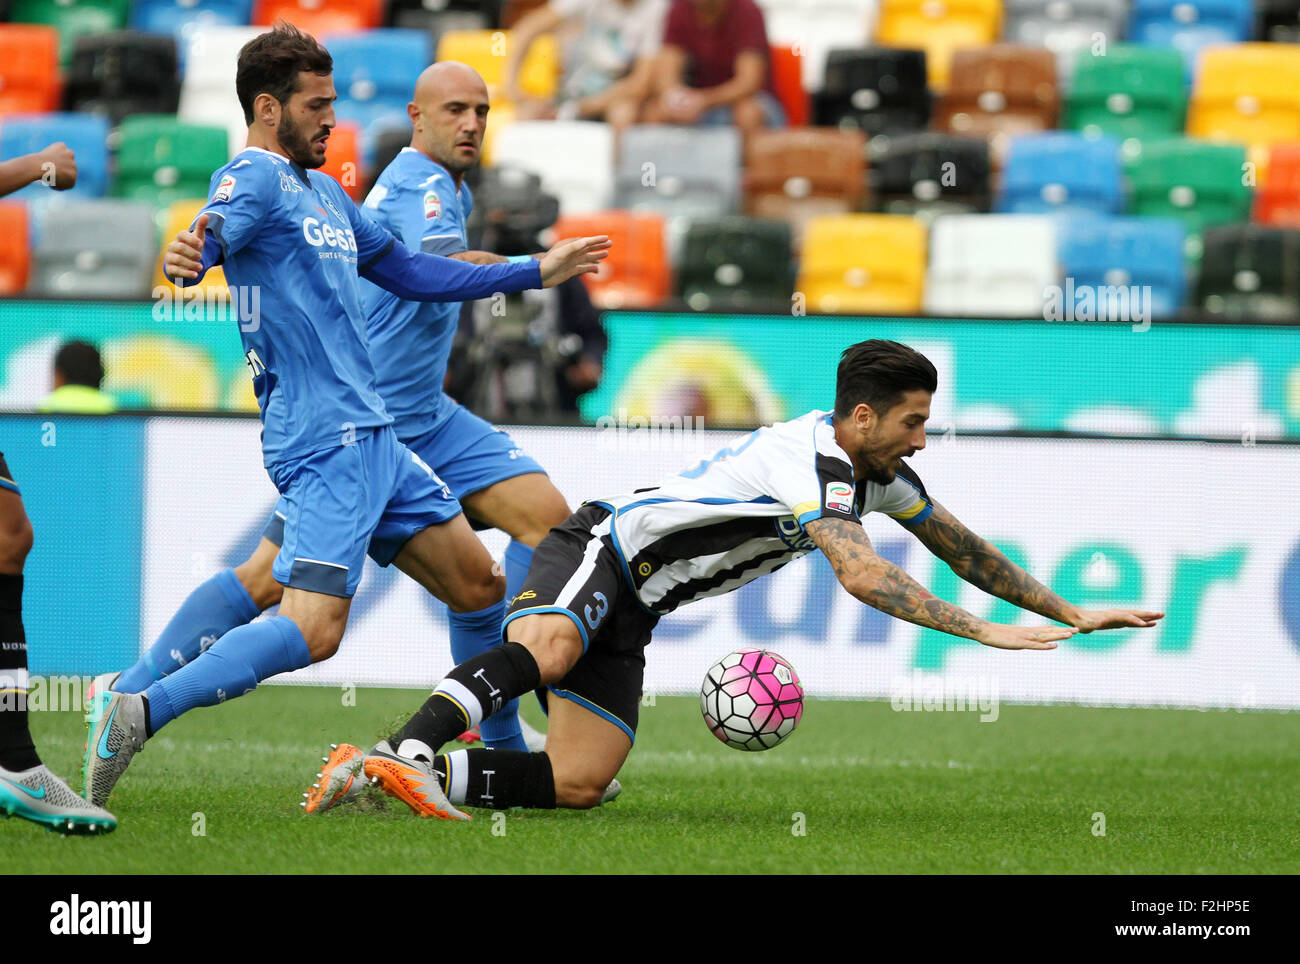 Udine, Italy. 19th September, 2015. Udinese's midfielder Panagiotis Giorgios Kone (R) fouls during the Italian Serie A football match between Udinese Calcio v Empoli at Friuli Stadium on 19 September, 2015 in Udine. Credit:  Andrea Spinelli/Alamy Live News Stock Photo